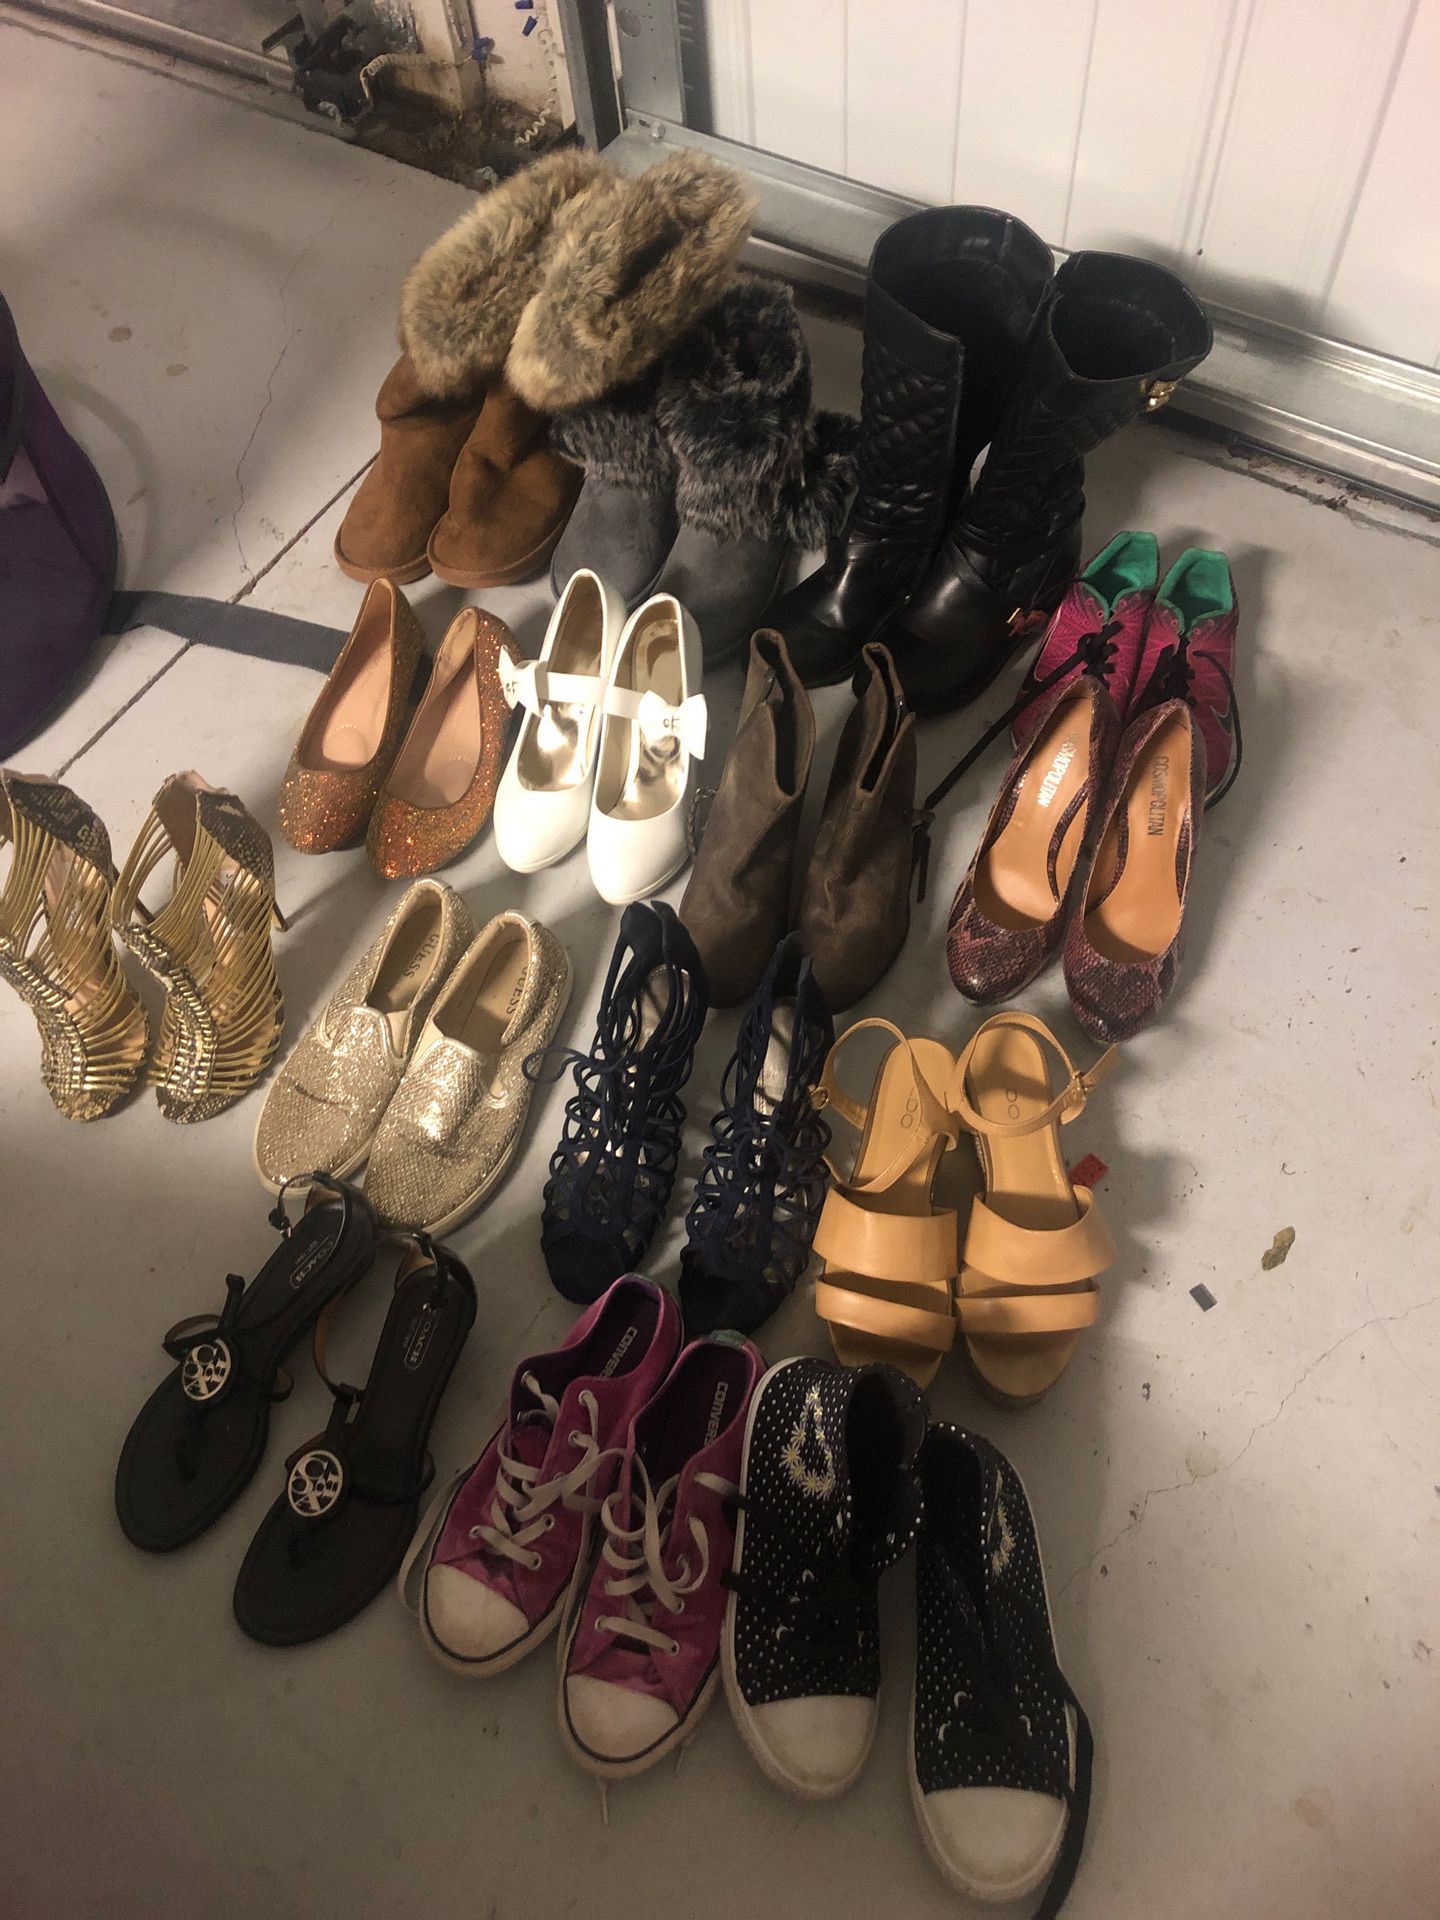 Michael kors, guess ,coach shoes @$5.00. must sell !!